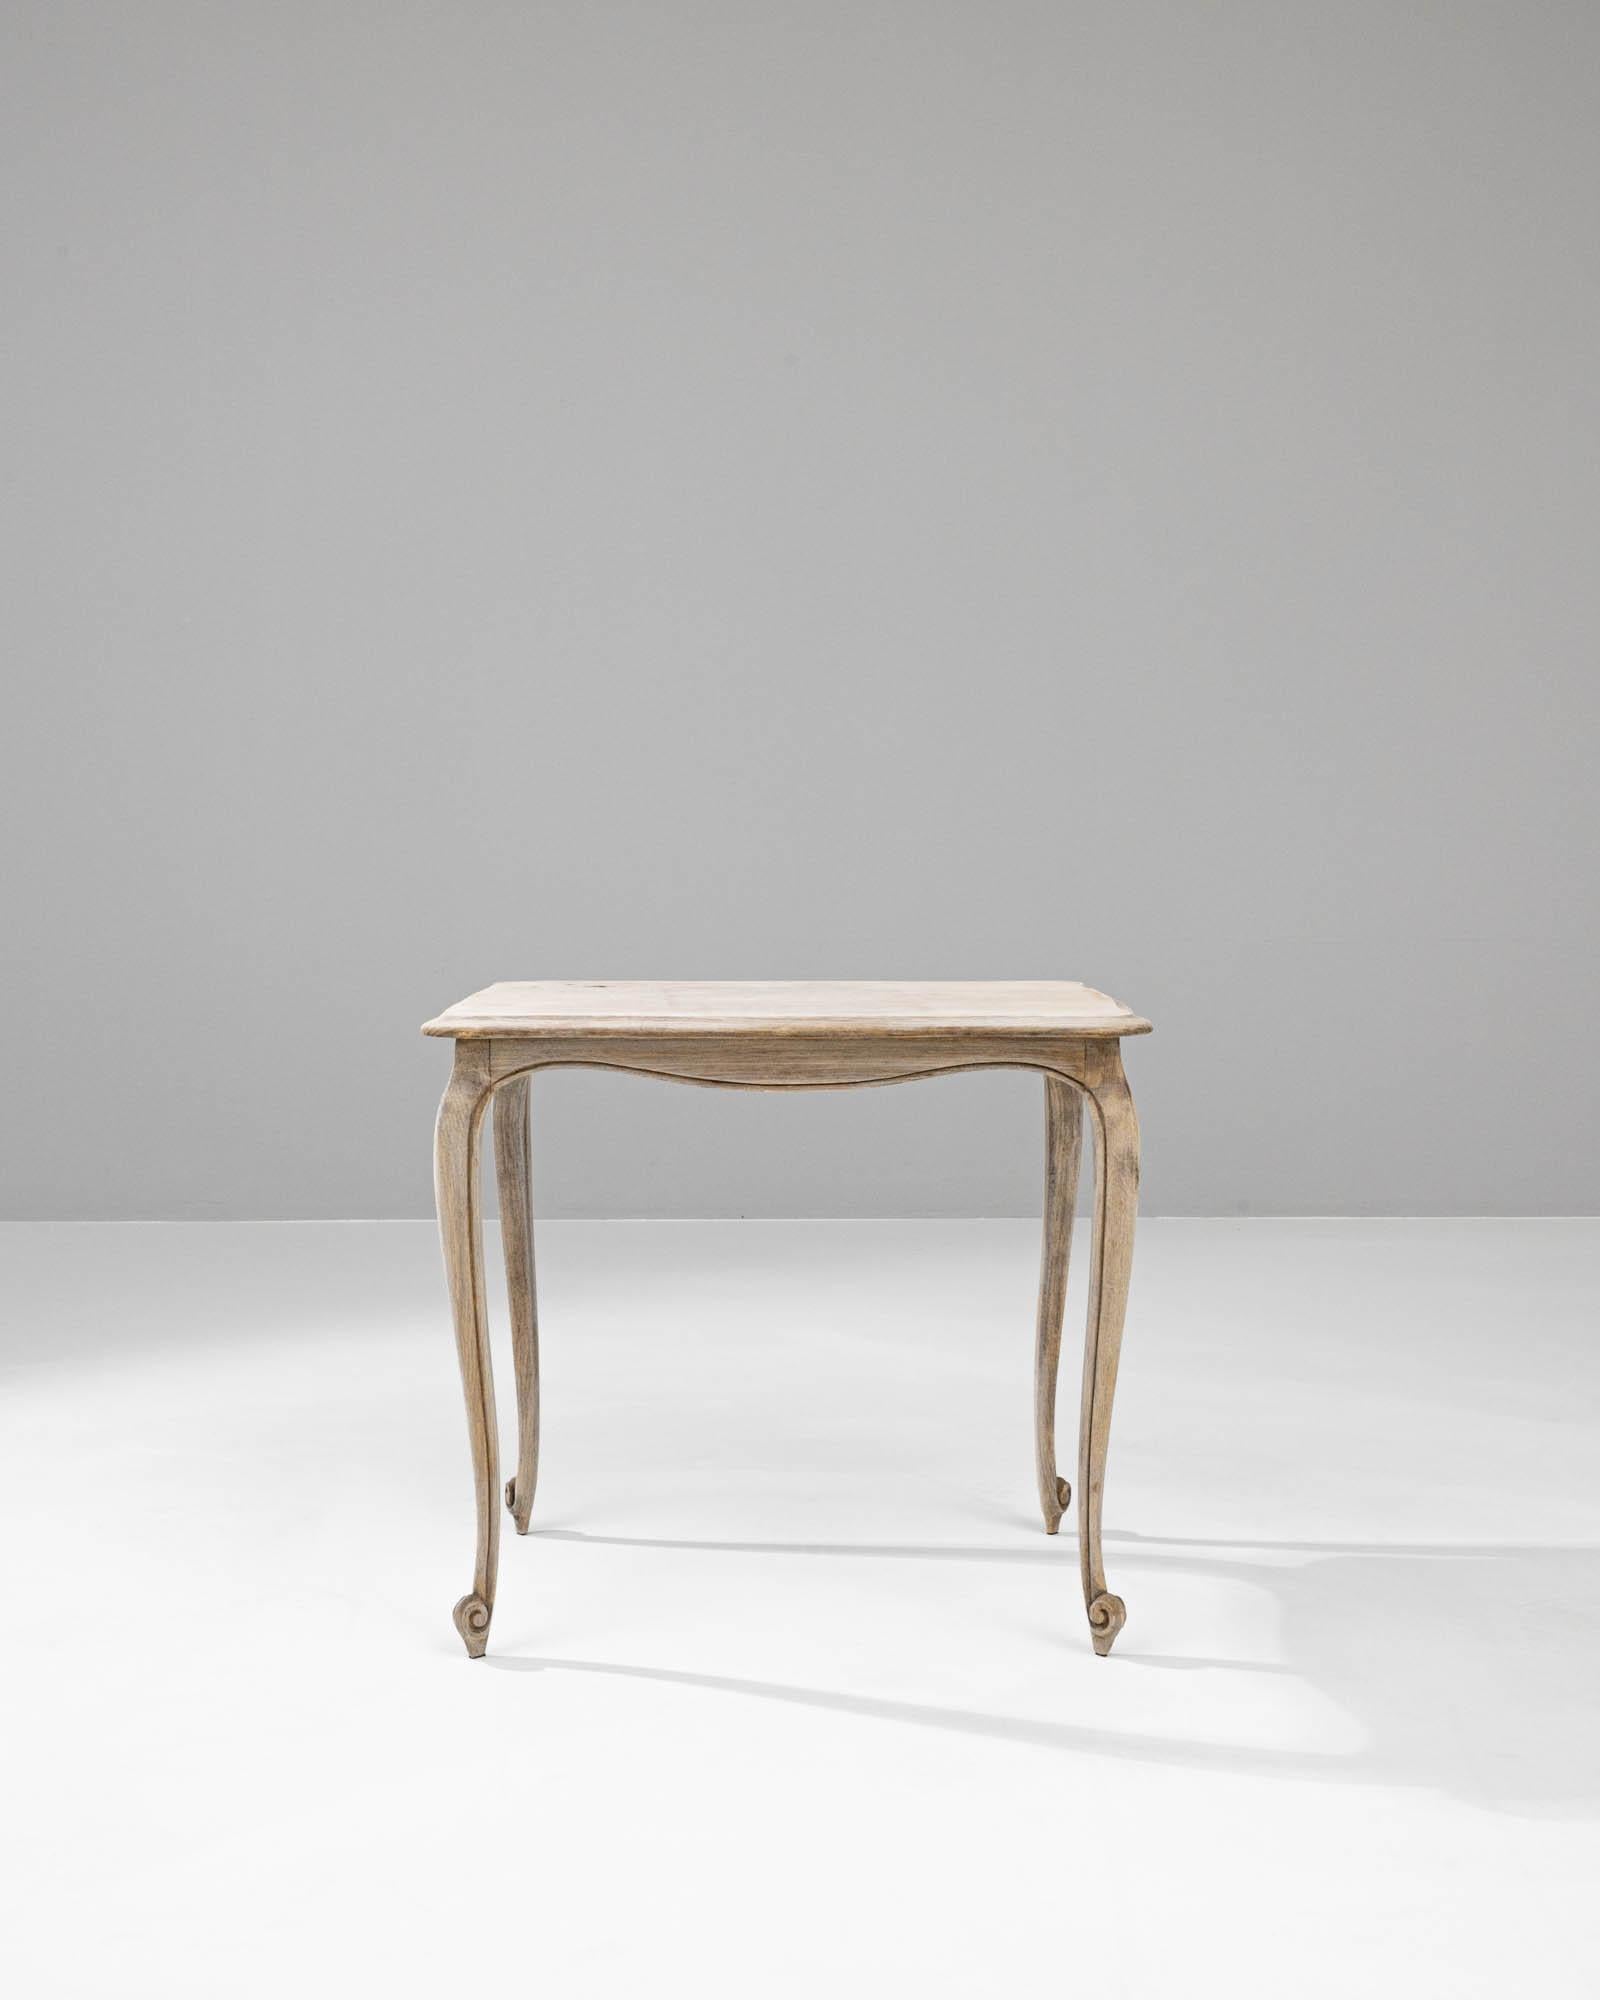 This 20th Century Belgian Bleached Oak Side Table beautifully captures the essence of rustic elegance. Crafted from solid oak, its wood grain is highlighted by a gentle bleaching process that offers a soft, weathered patina, evoking a sense of